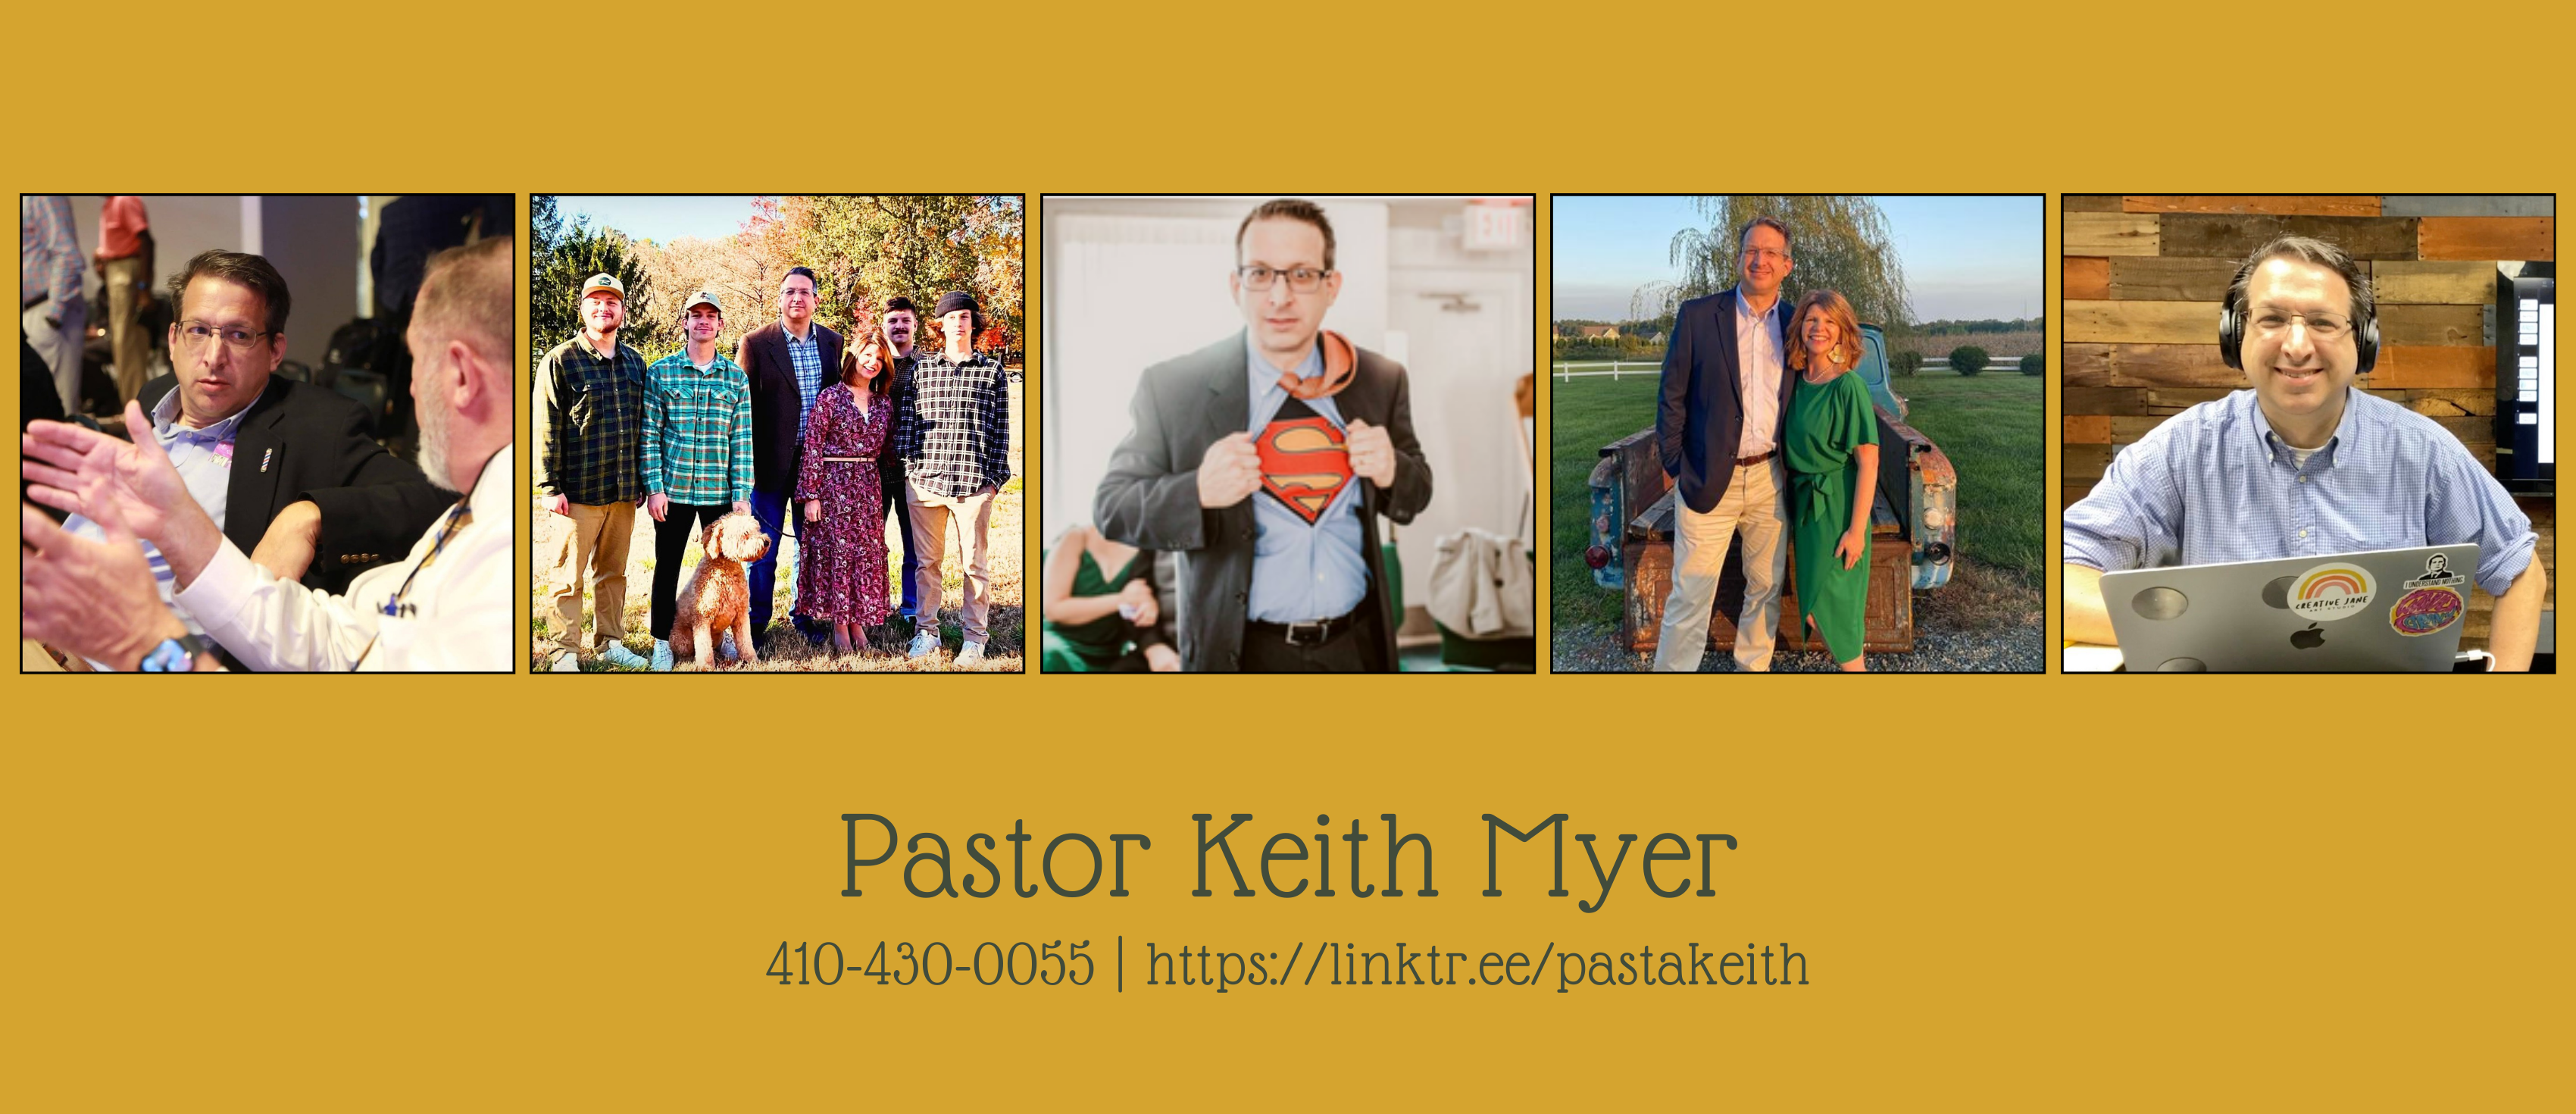 Pastor Keith Myer